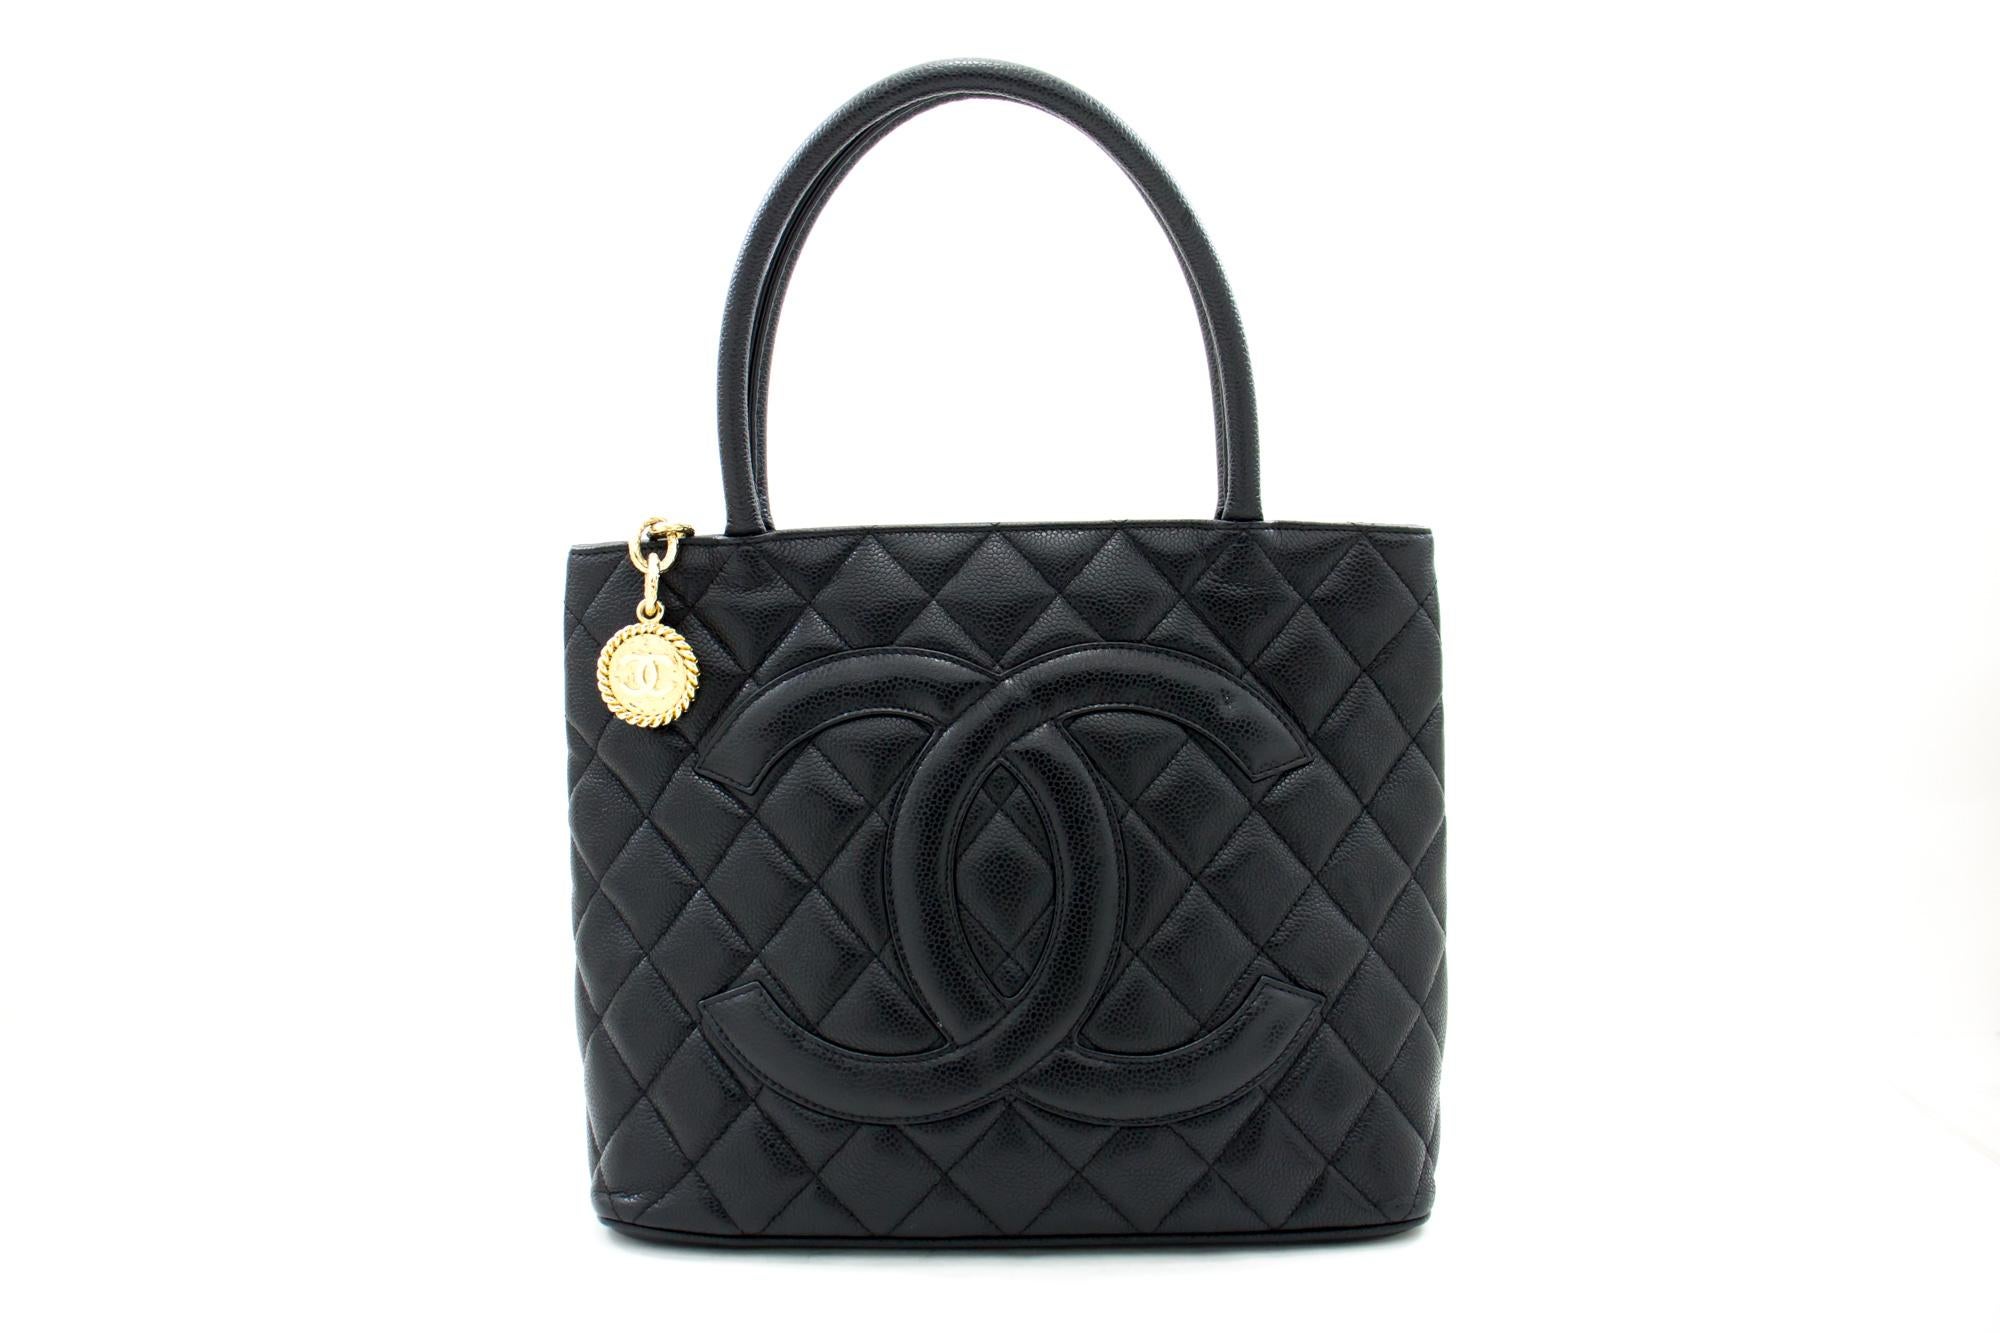 An authentic CHANEL Gold Medallion Caviar Shoulder Bag Grand Shopping Tote. The color is Black. The outside material is Leather. The pattern is Solid. This item is Contemporary. The year of manufacture would be 2009.
Conditions & Ratings
Outside